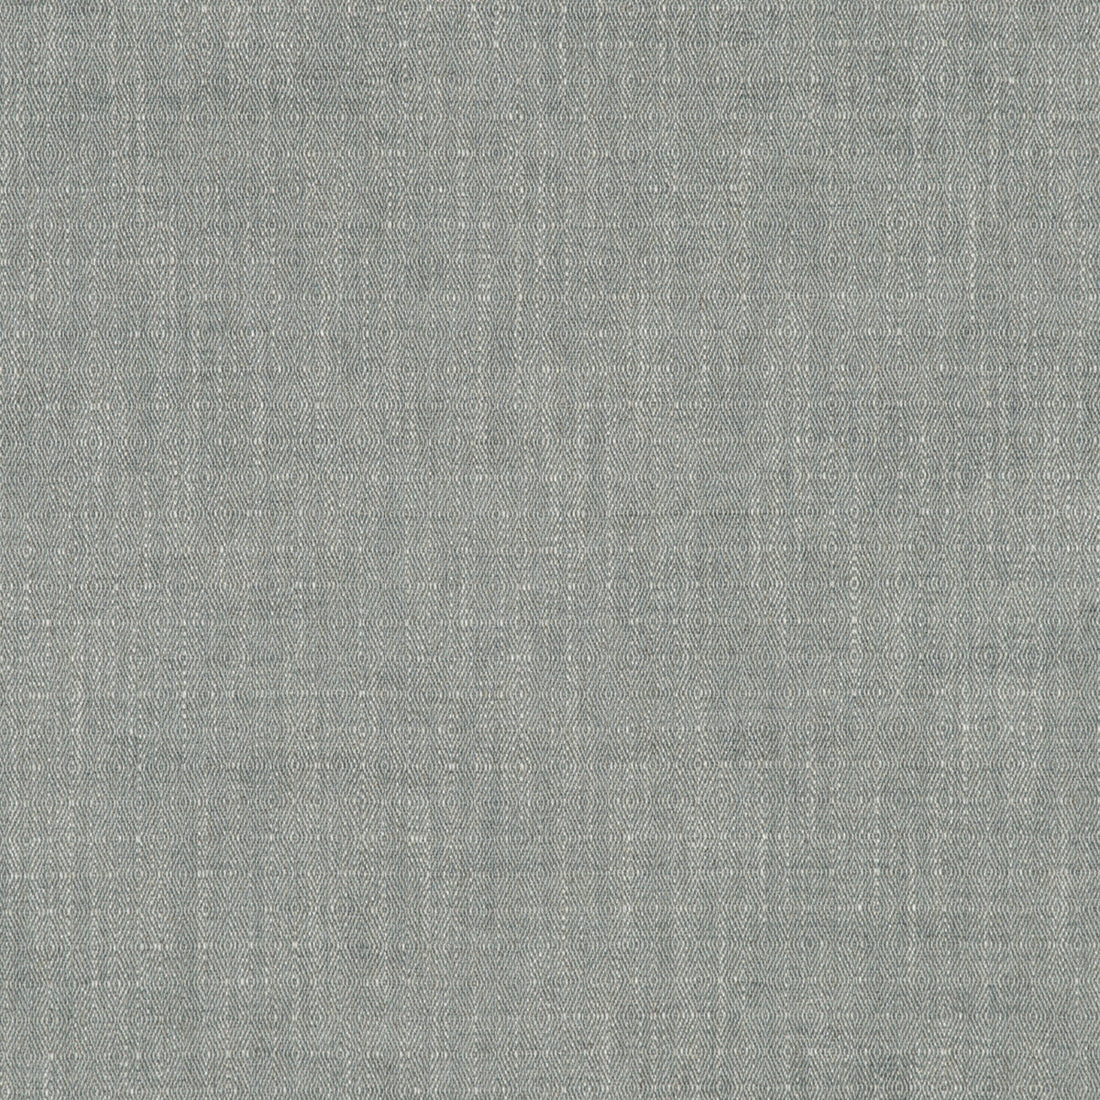 Hayle fabric in teal color - pattern BF10570.615.0 - by G P &amp; J Baker in the Artisan collection